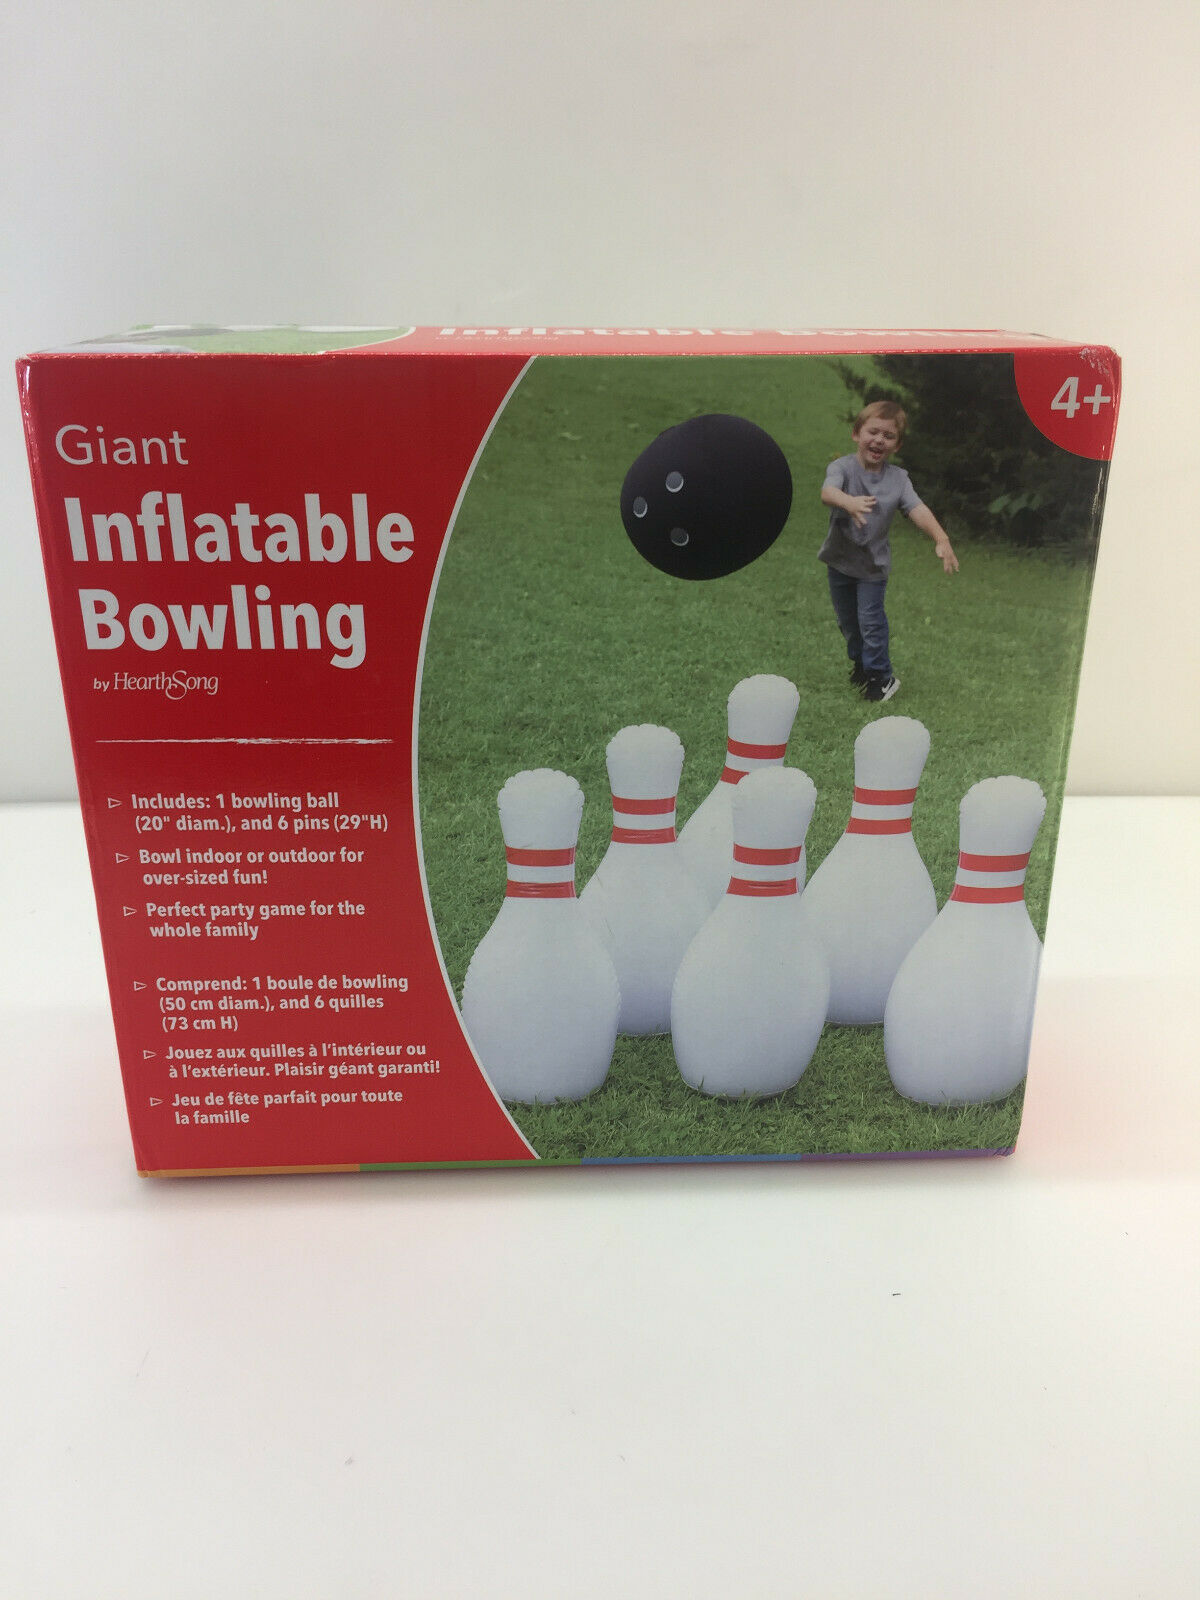 Hearthsong Giant Indoor/outdoor Inflatable Bowling Game